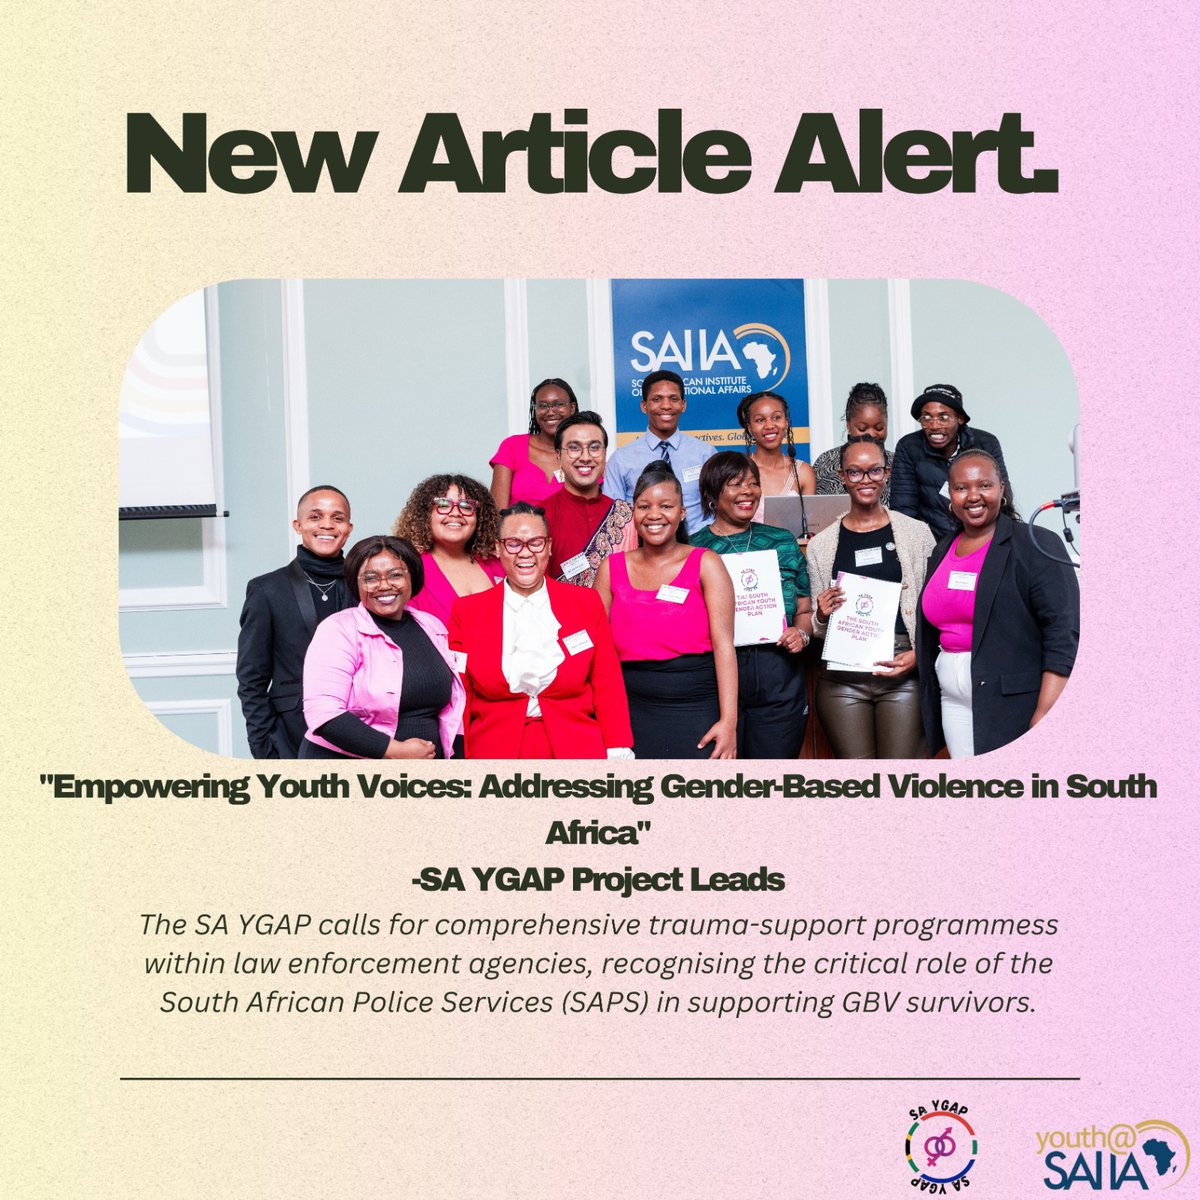 Dive into this insightful article, highlighting the innovative SA YGAP . Striving for gender-inclusive spaces and united efforts to combat GBV, focusing on sustainable, affordable, and widely accessible solutions (#SAWA). #YOUthAreLeading #EndGBV saiia.org.za/research/empow…